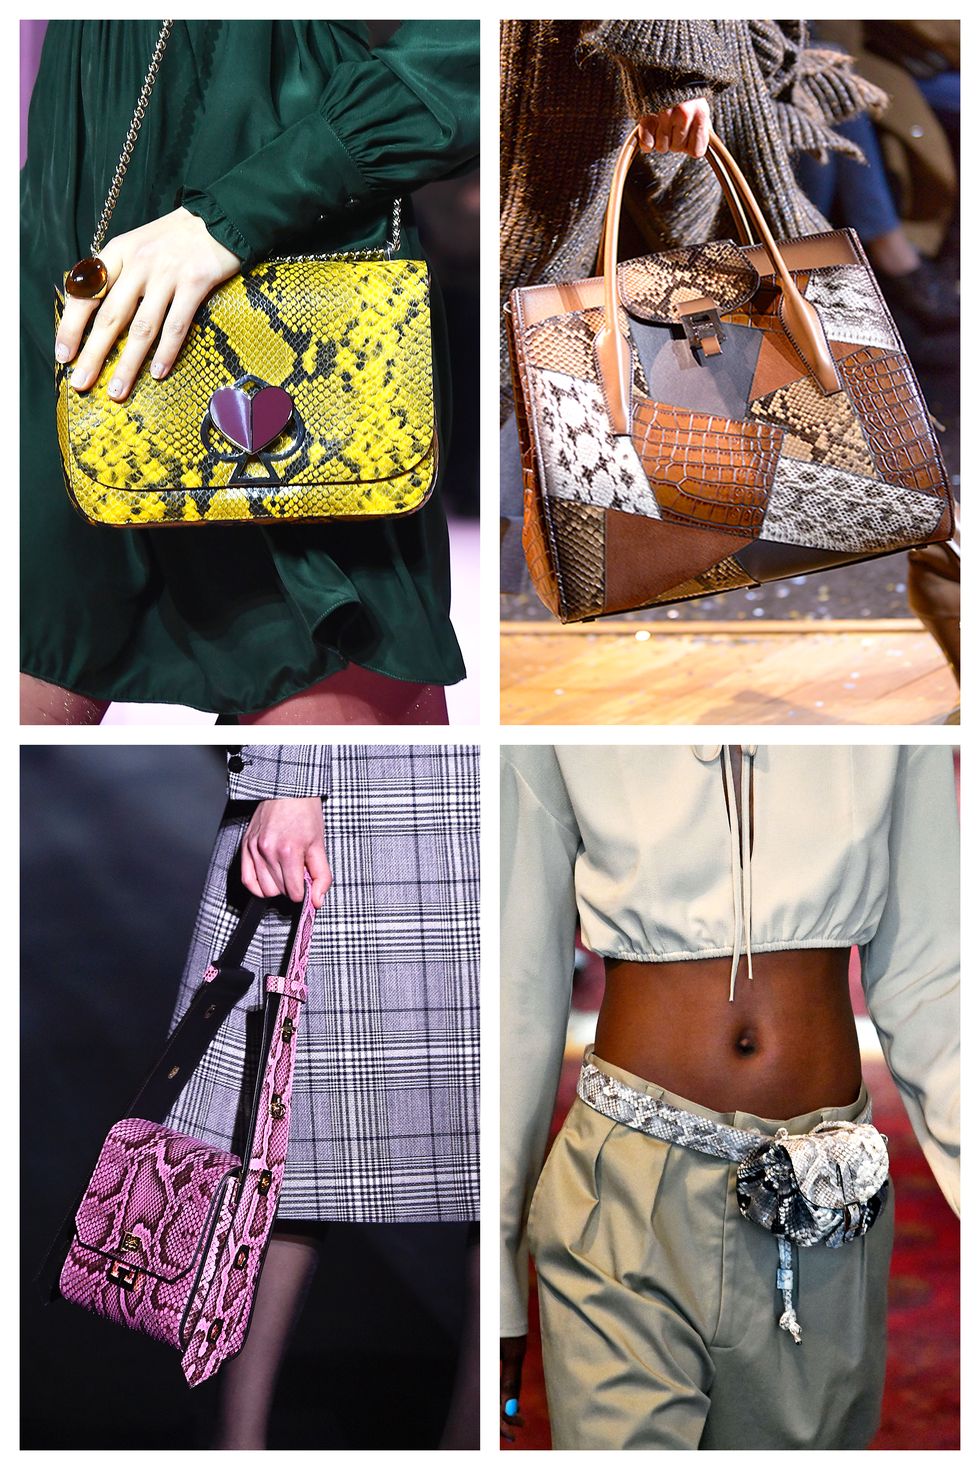 Autumn Bag Trends 2020: The Double Top-Handle Tote